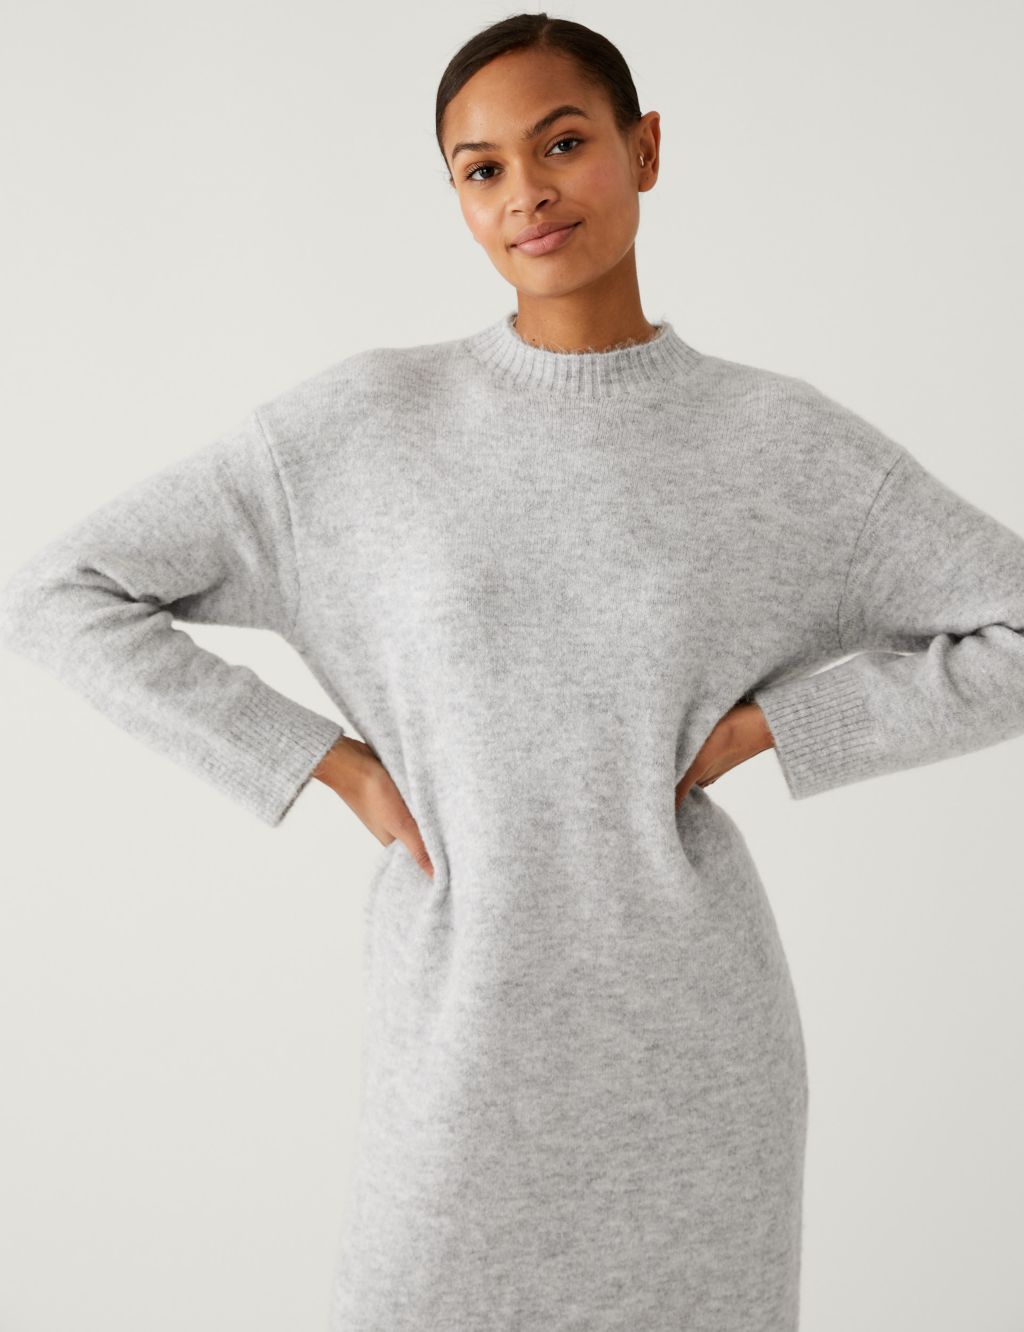 Knitted Crew Neck Dress image 2